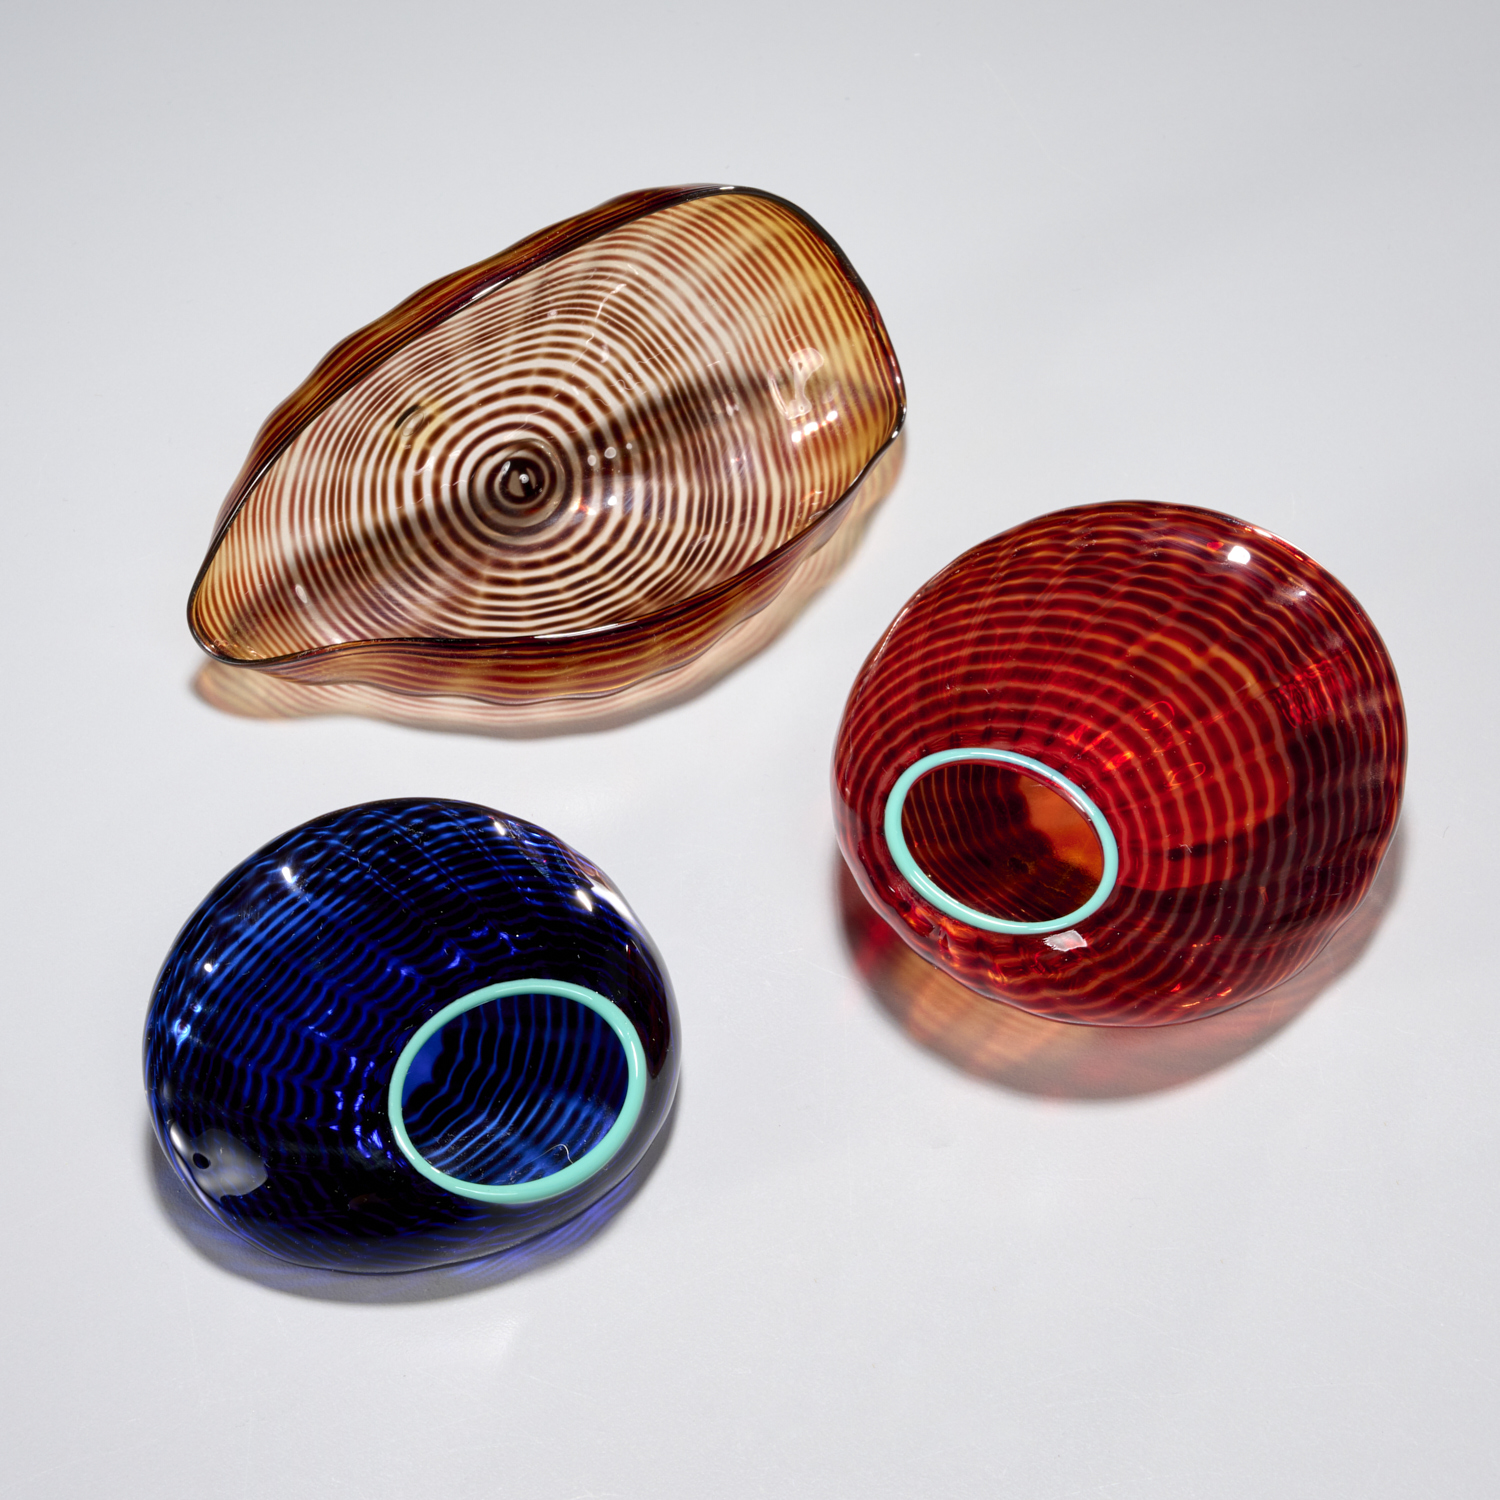 DALE CHIHULY, (3) SMALL GLASS VESSEL